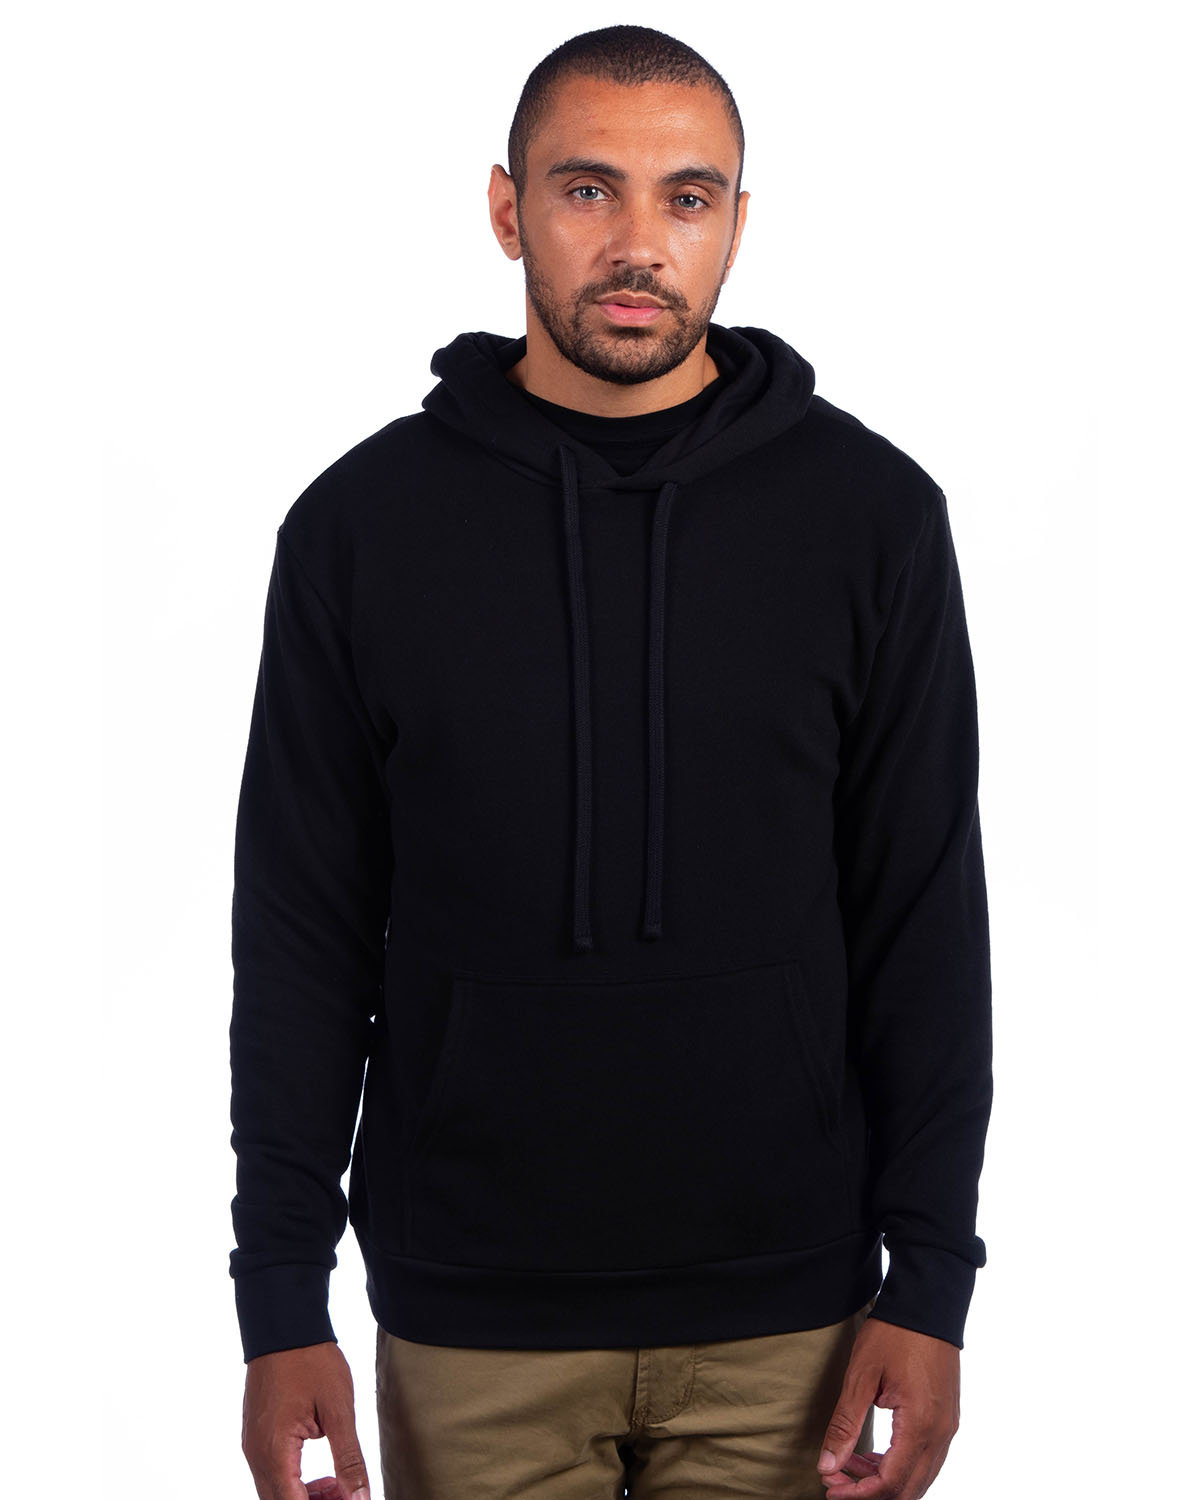 Next Level Adult Sueded French Terry Pullover Sweatshirt BLACK 